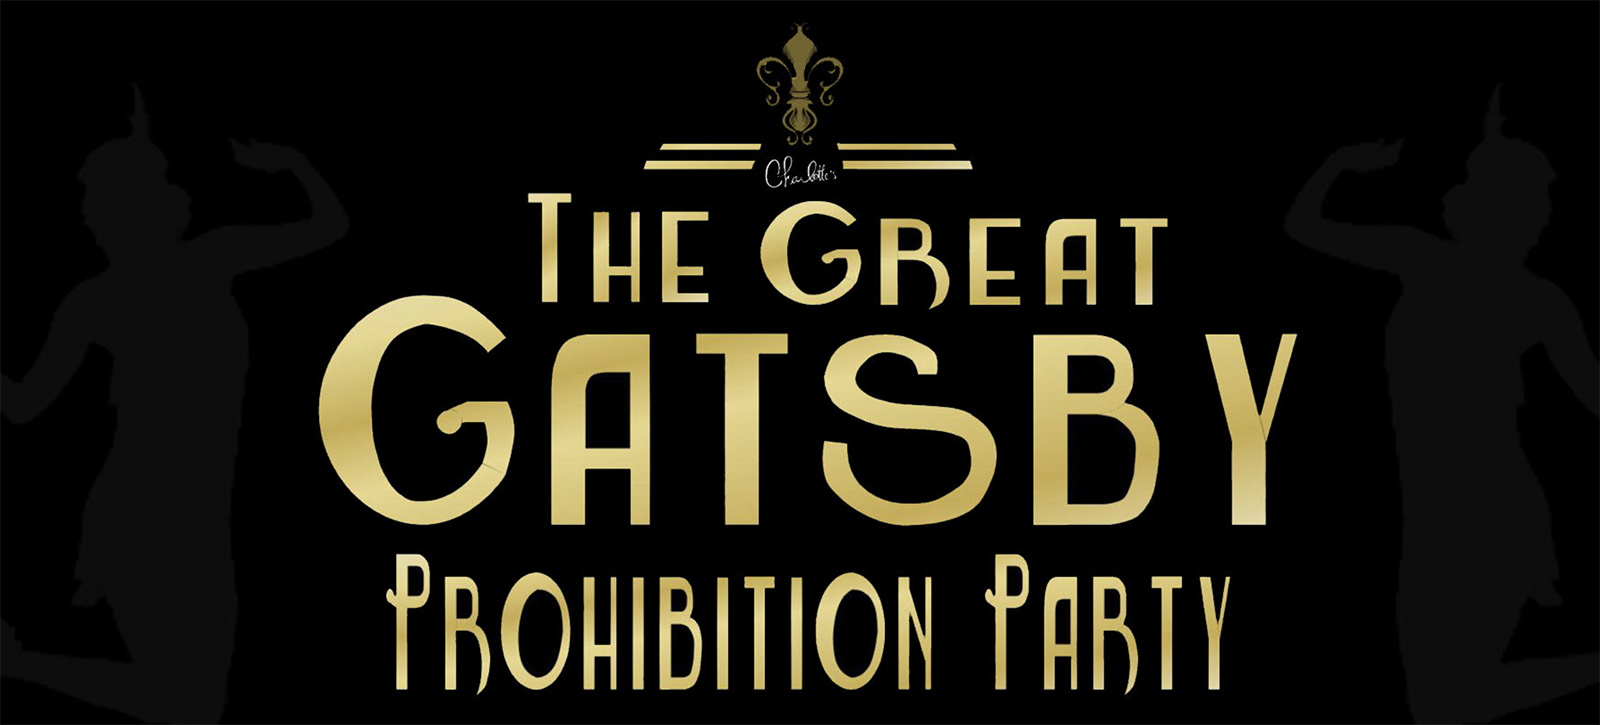 The Great Gatsby Prohibition Party